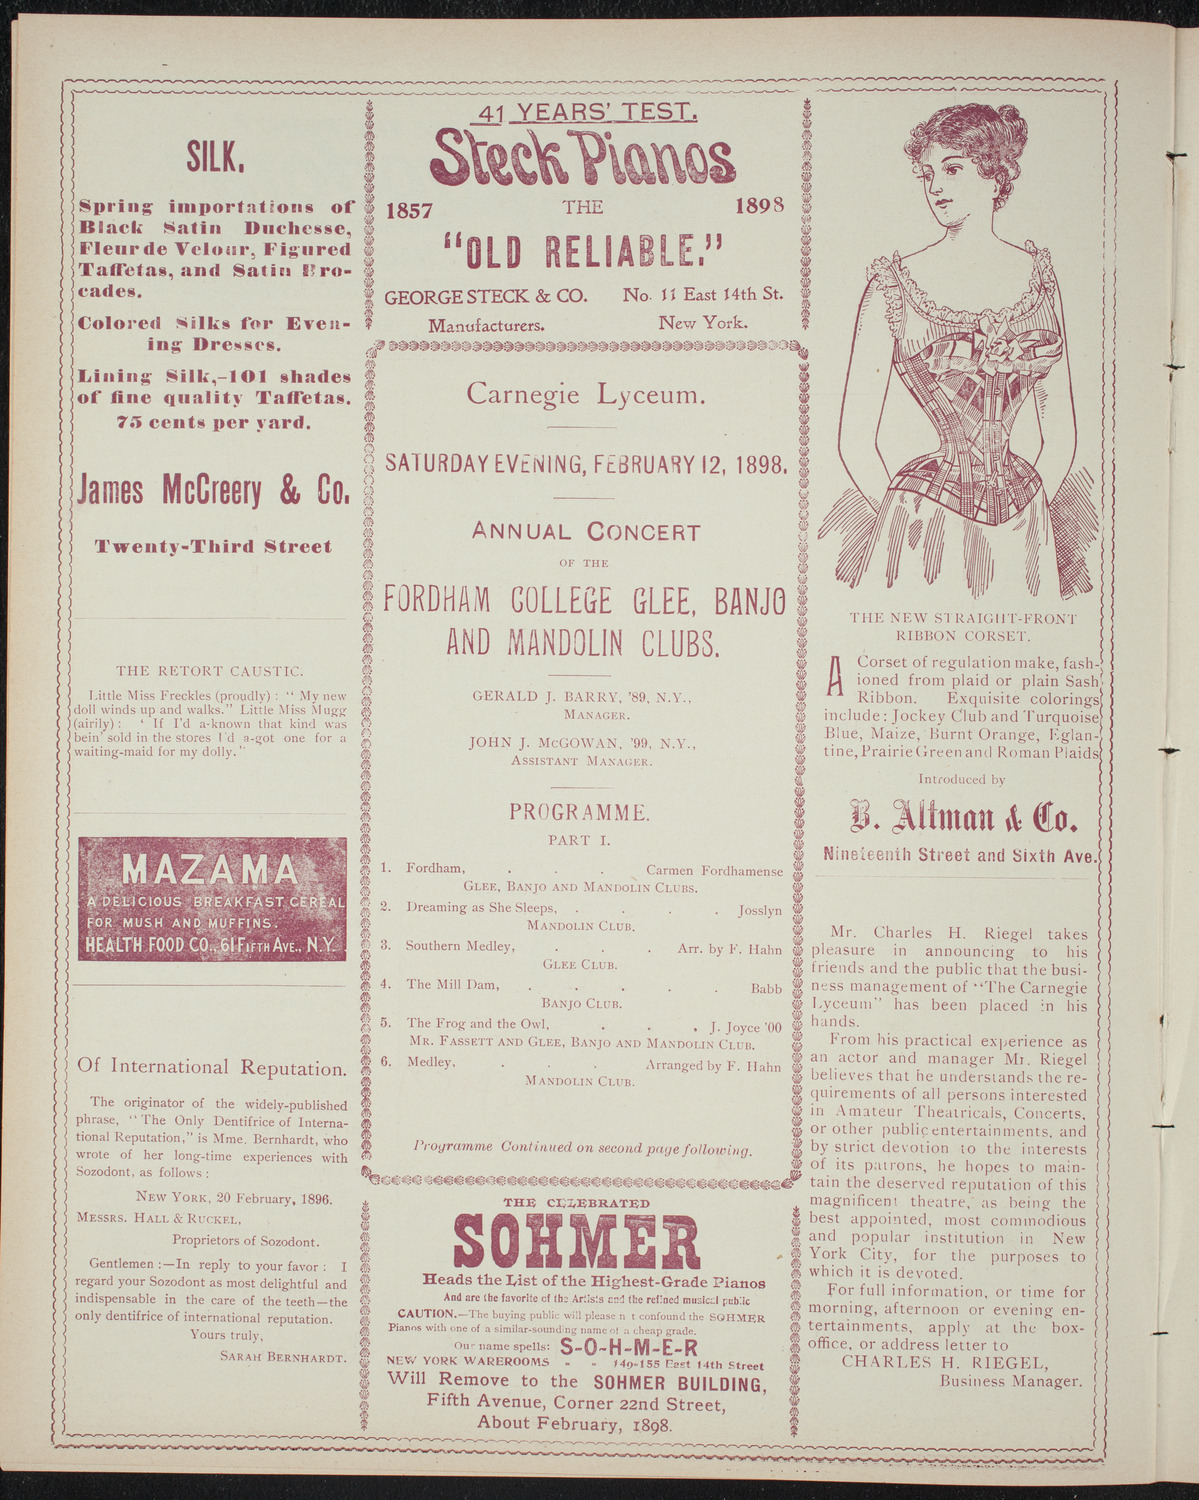 Fordham College Glee, Banjo, and Mandolin Clubs, February 12, 1898, program page 4